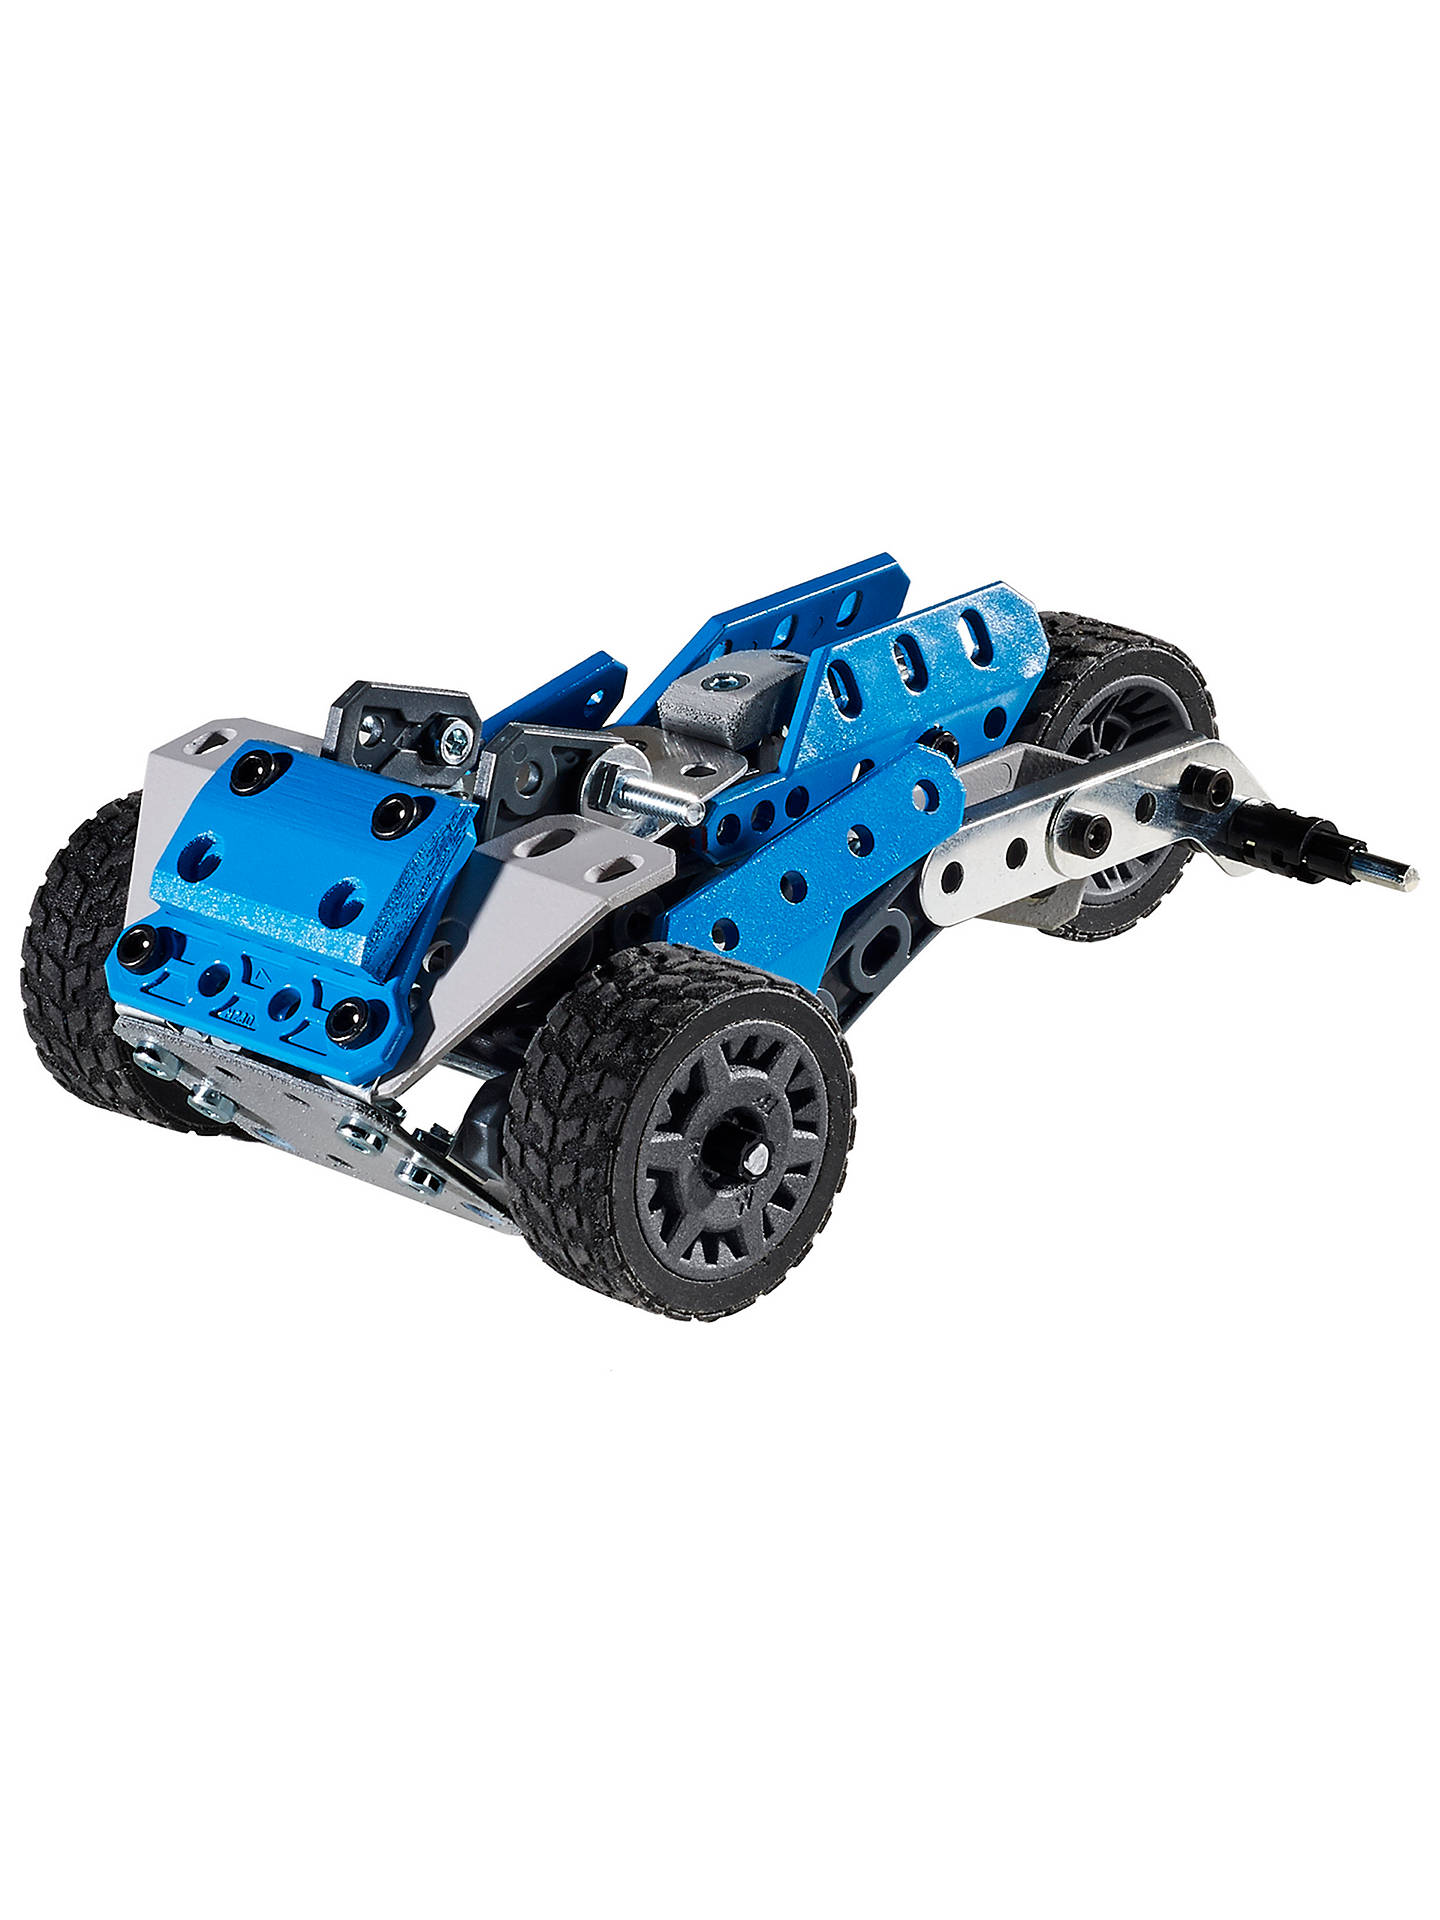 Meccano 10 In 1 Rally Racer Set At John Lewis Partners